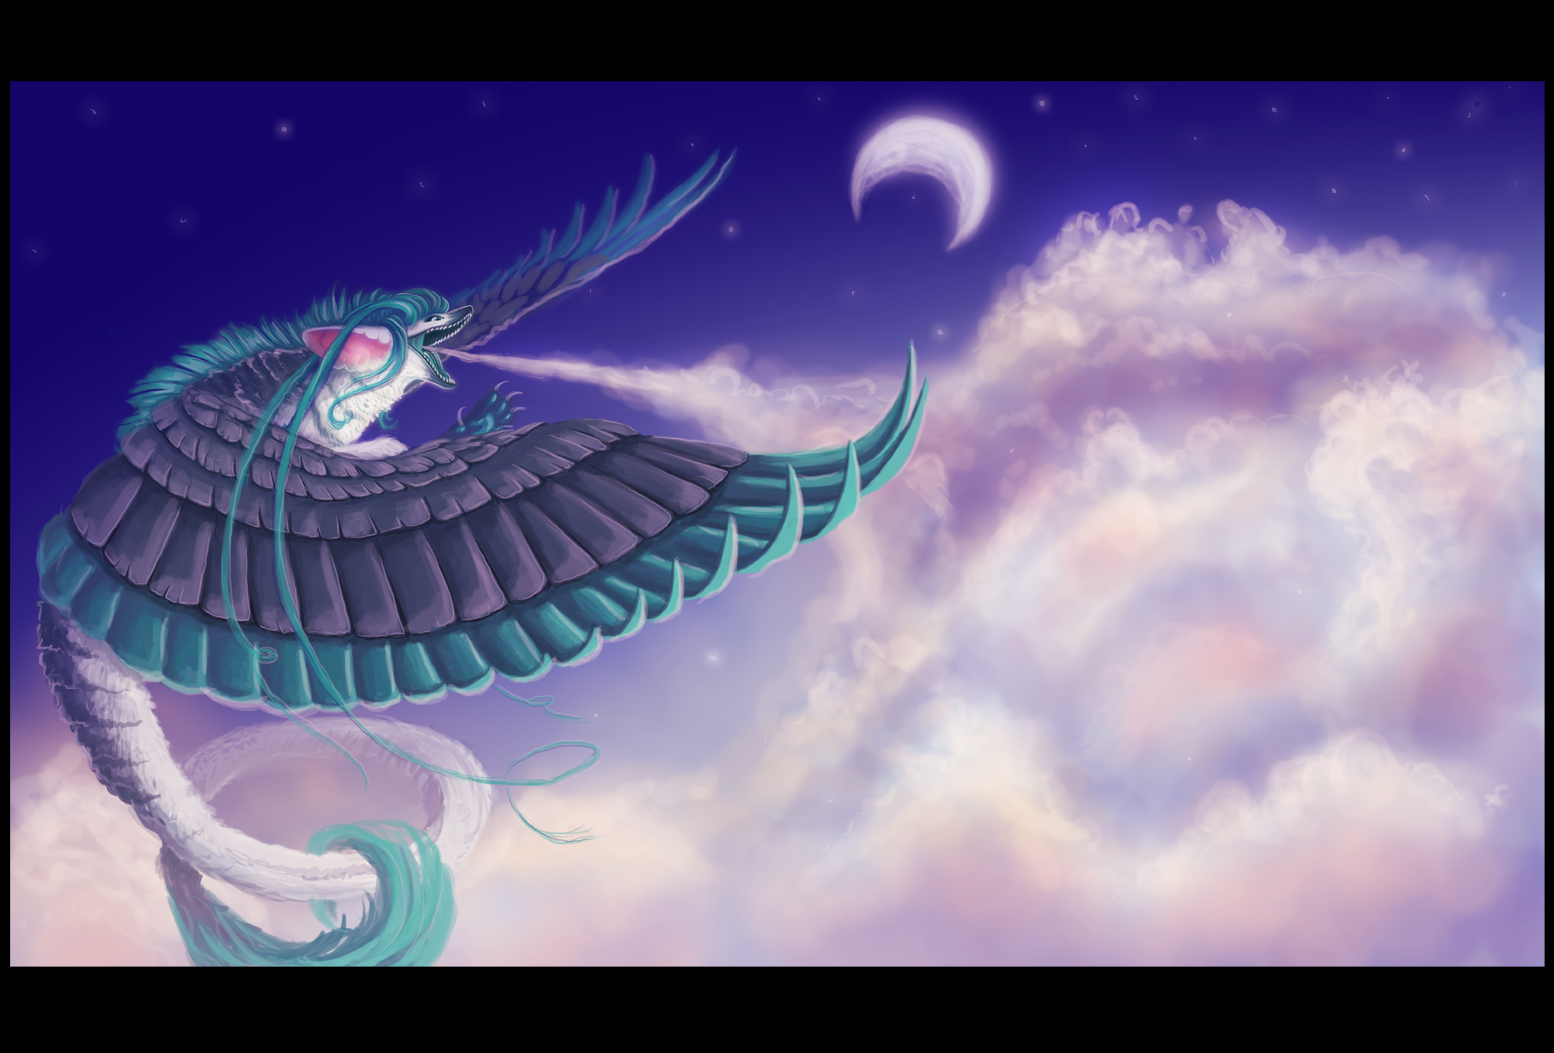 moonlit_wishes_by_lazeros-d6gplv7.png